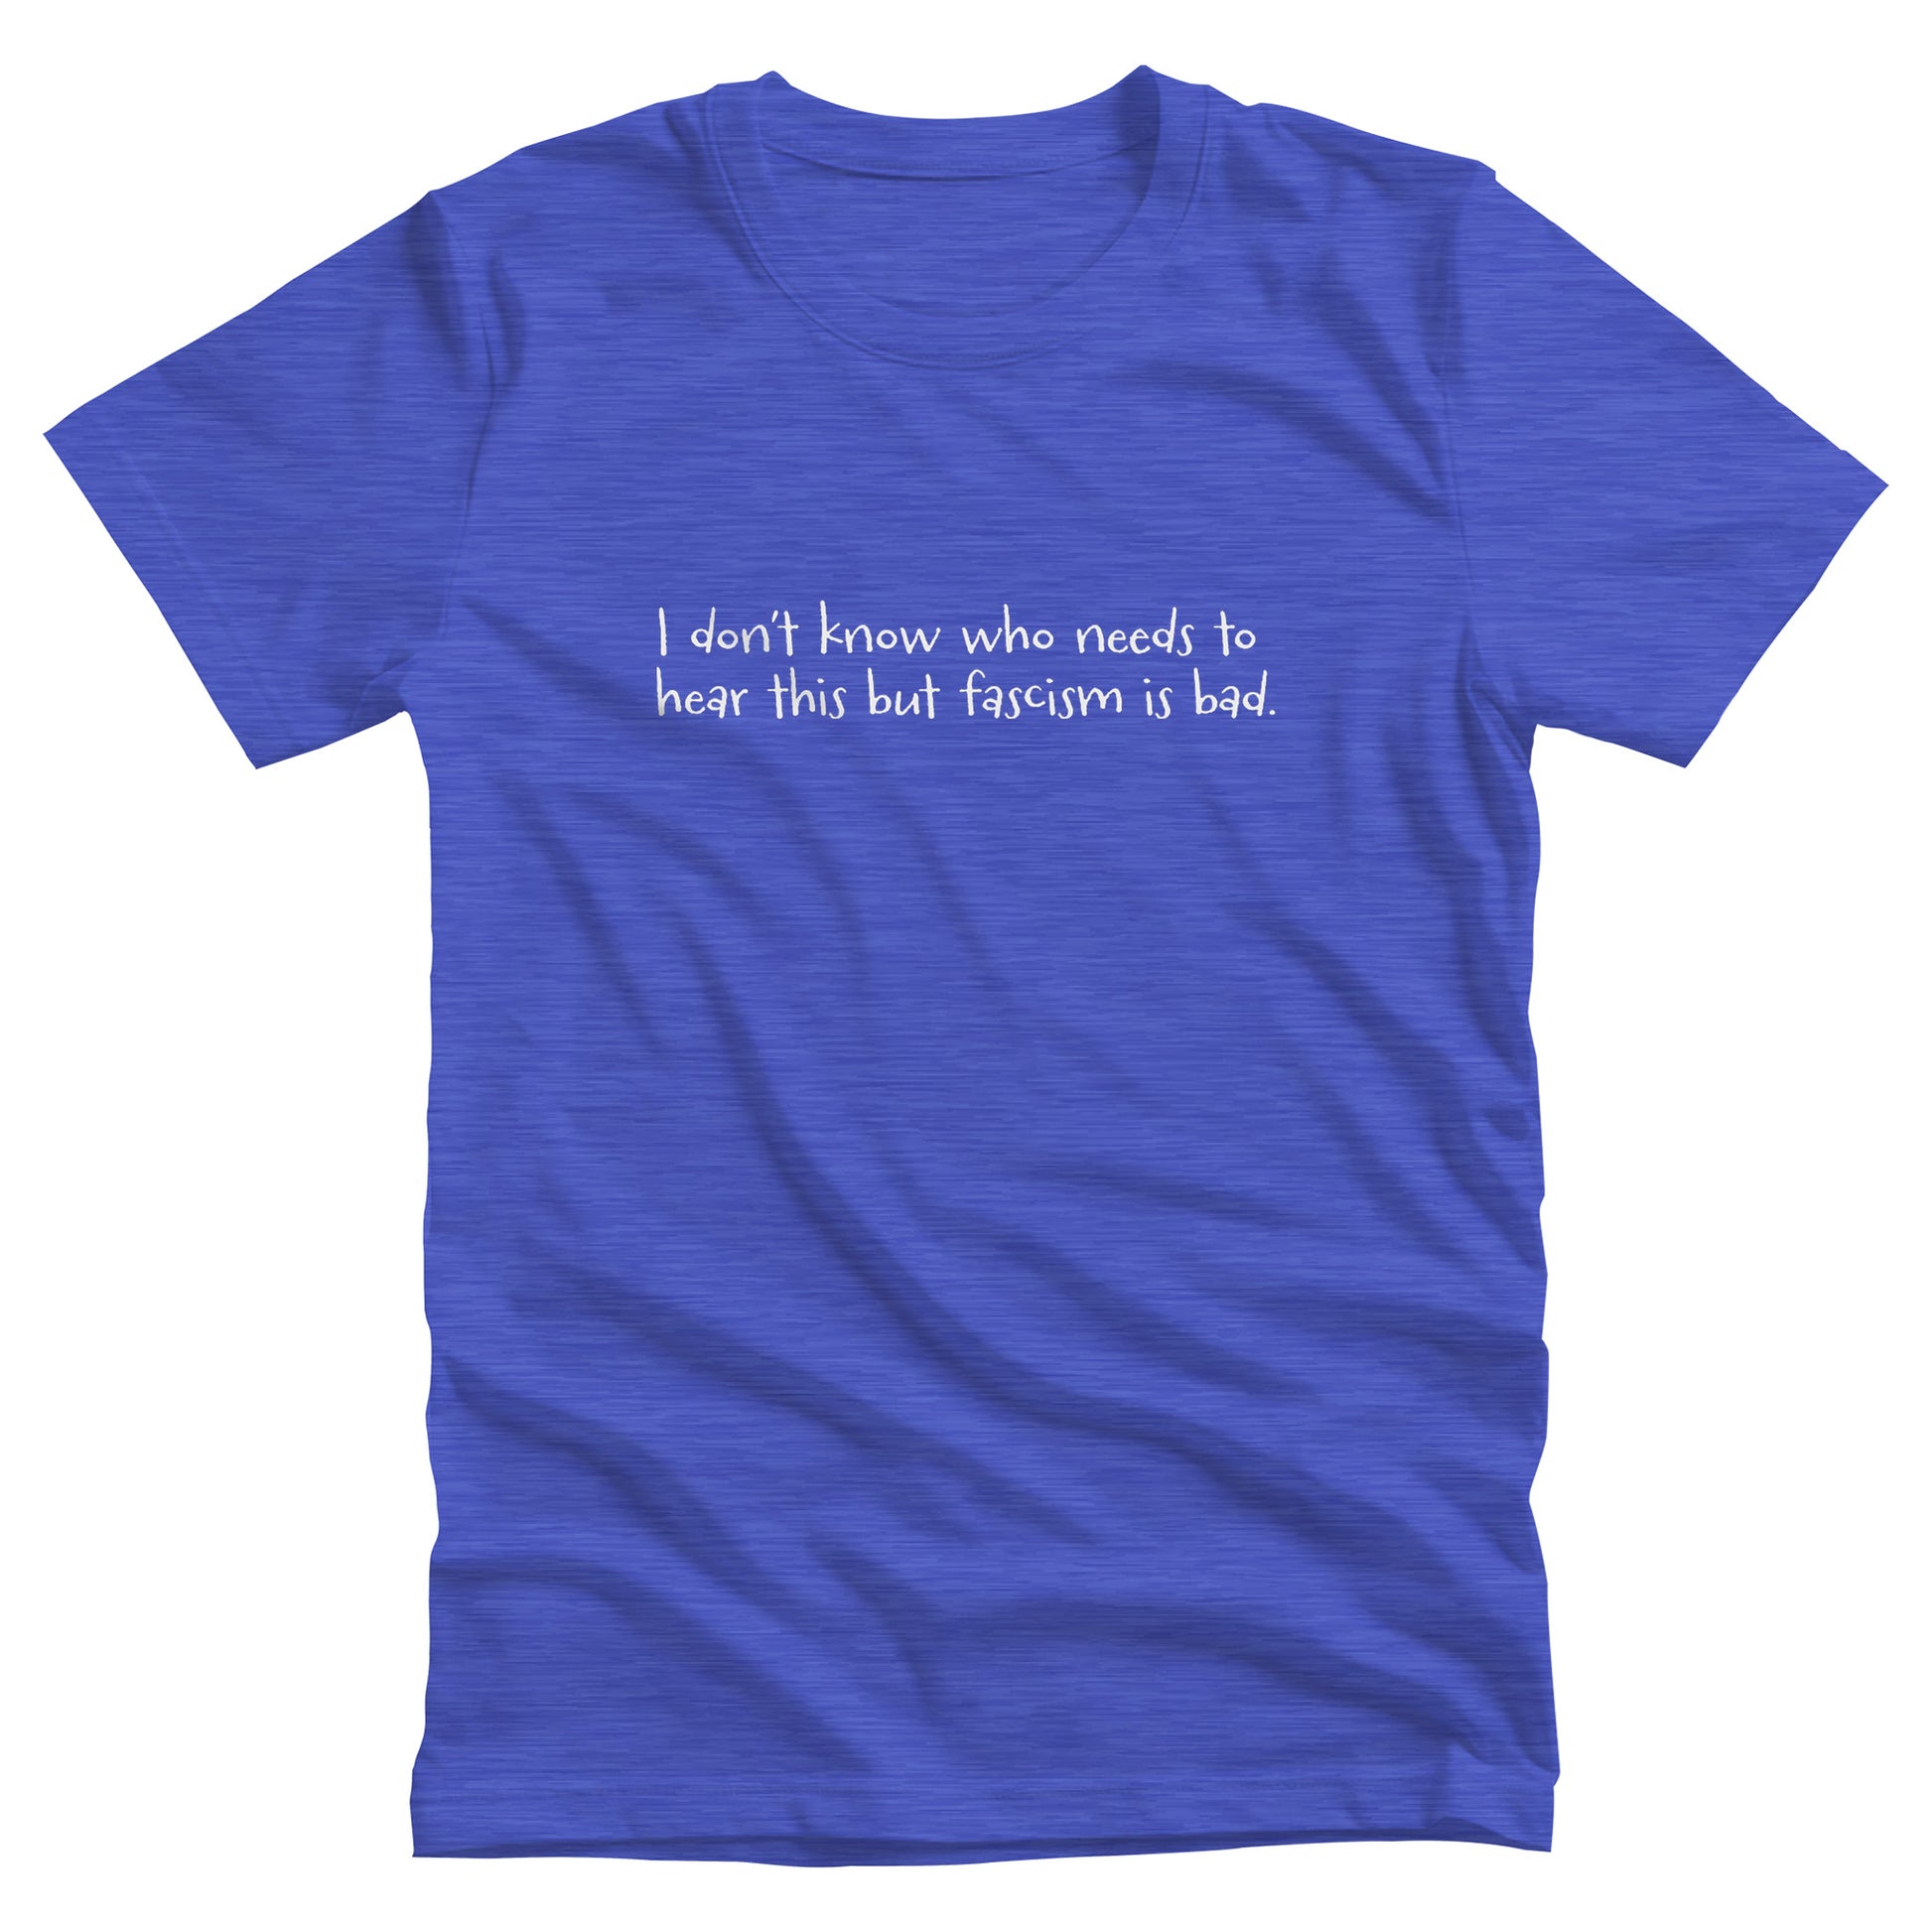 Heather True Royal color unisex t-shirt that reads in a hand-written font, “I don’t know who needs to hear this but fascism is bad.” It takes up two lines.